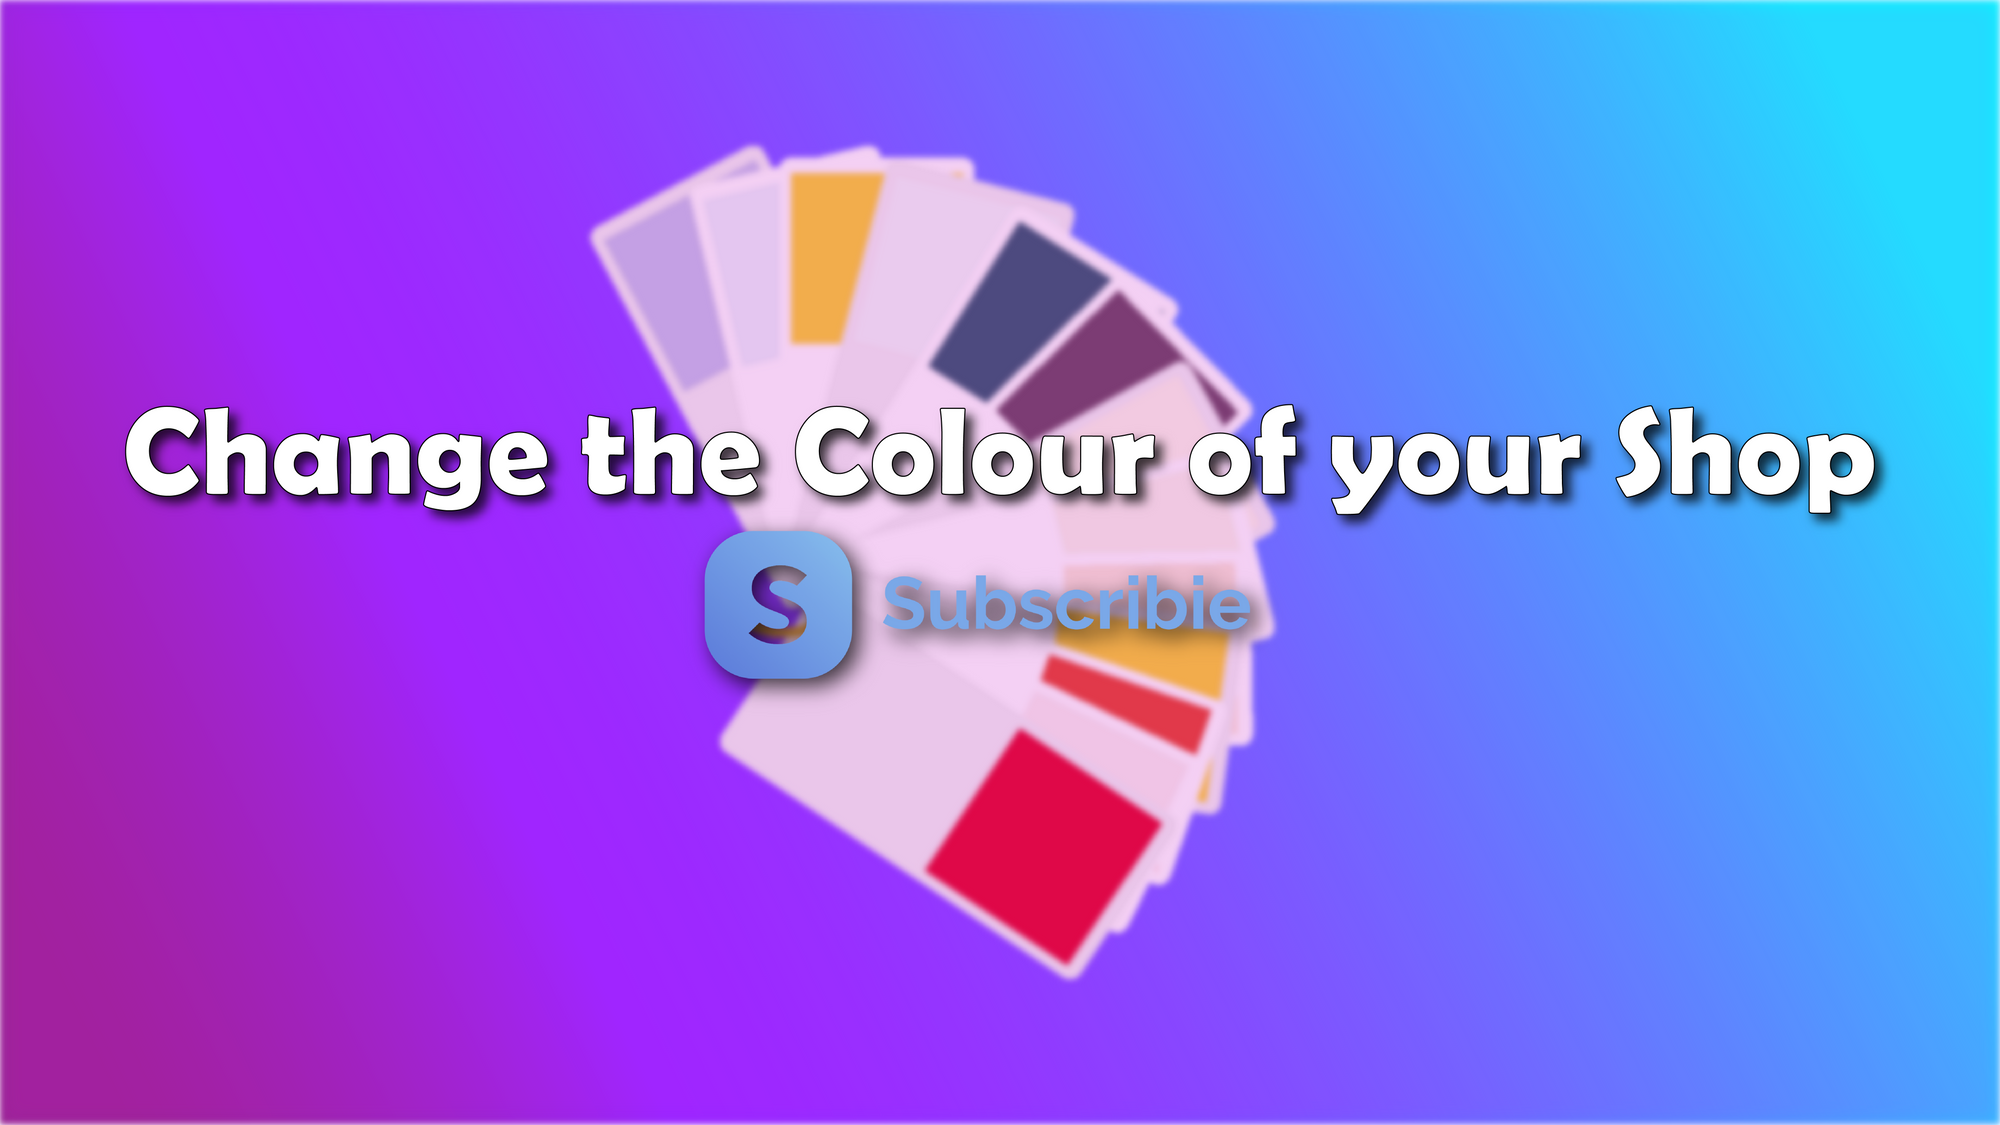 How to Change the Colour of your Shop